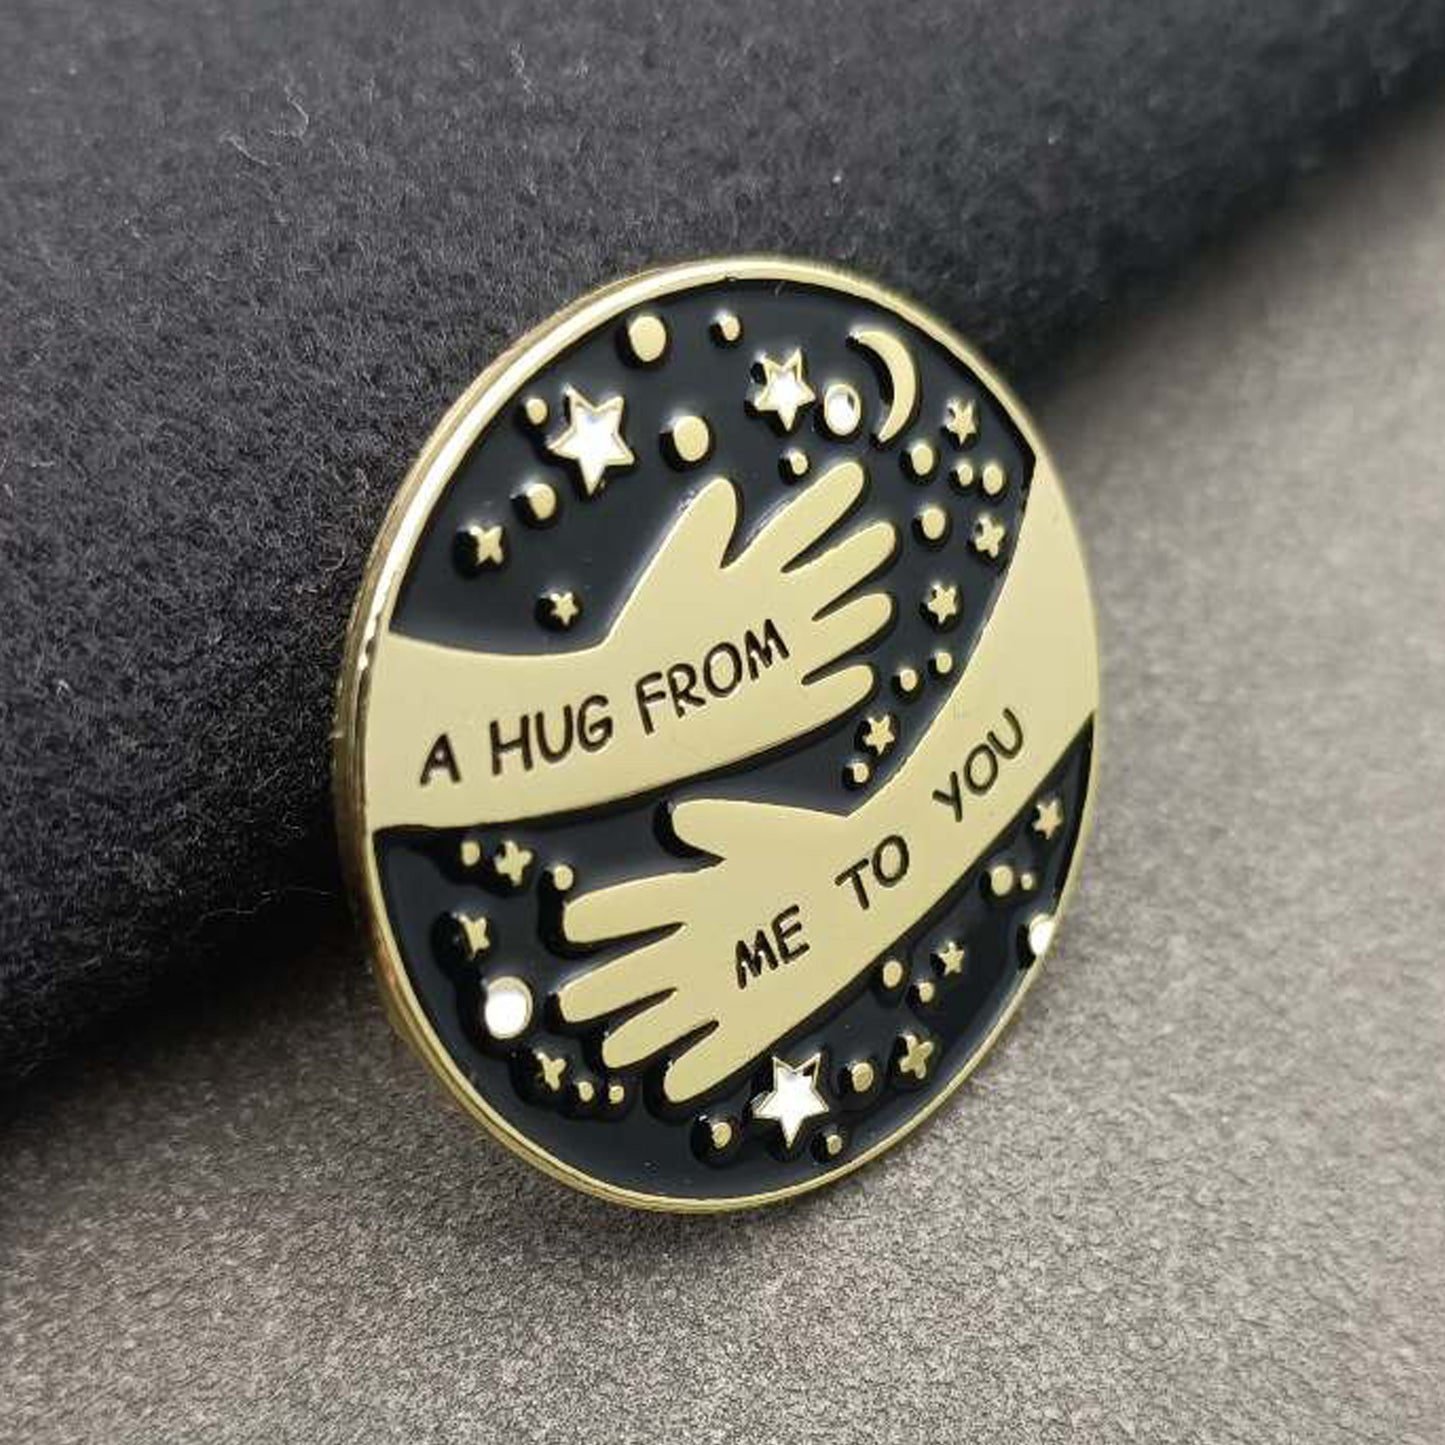 Sending Big Hugs Pin Badges With Personalised Moon Stars & Clouds Message Cards